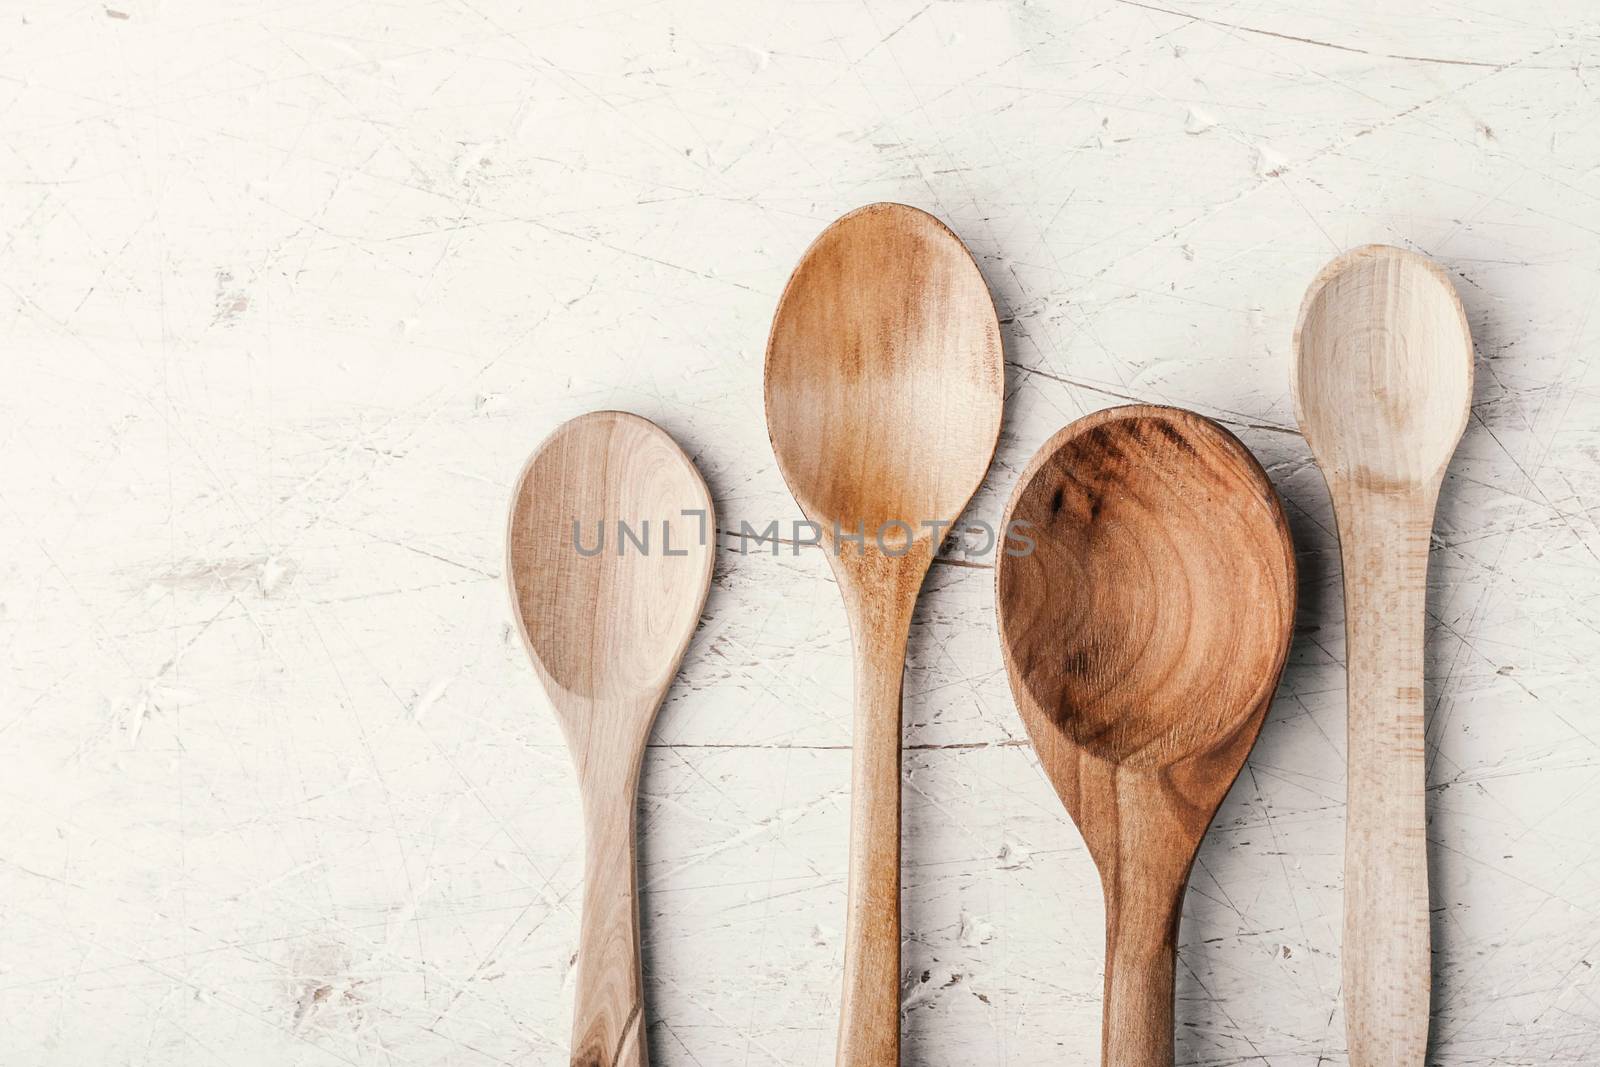 Wooden spoons on the white table horizontal